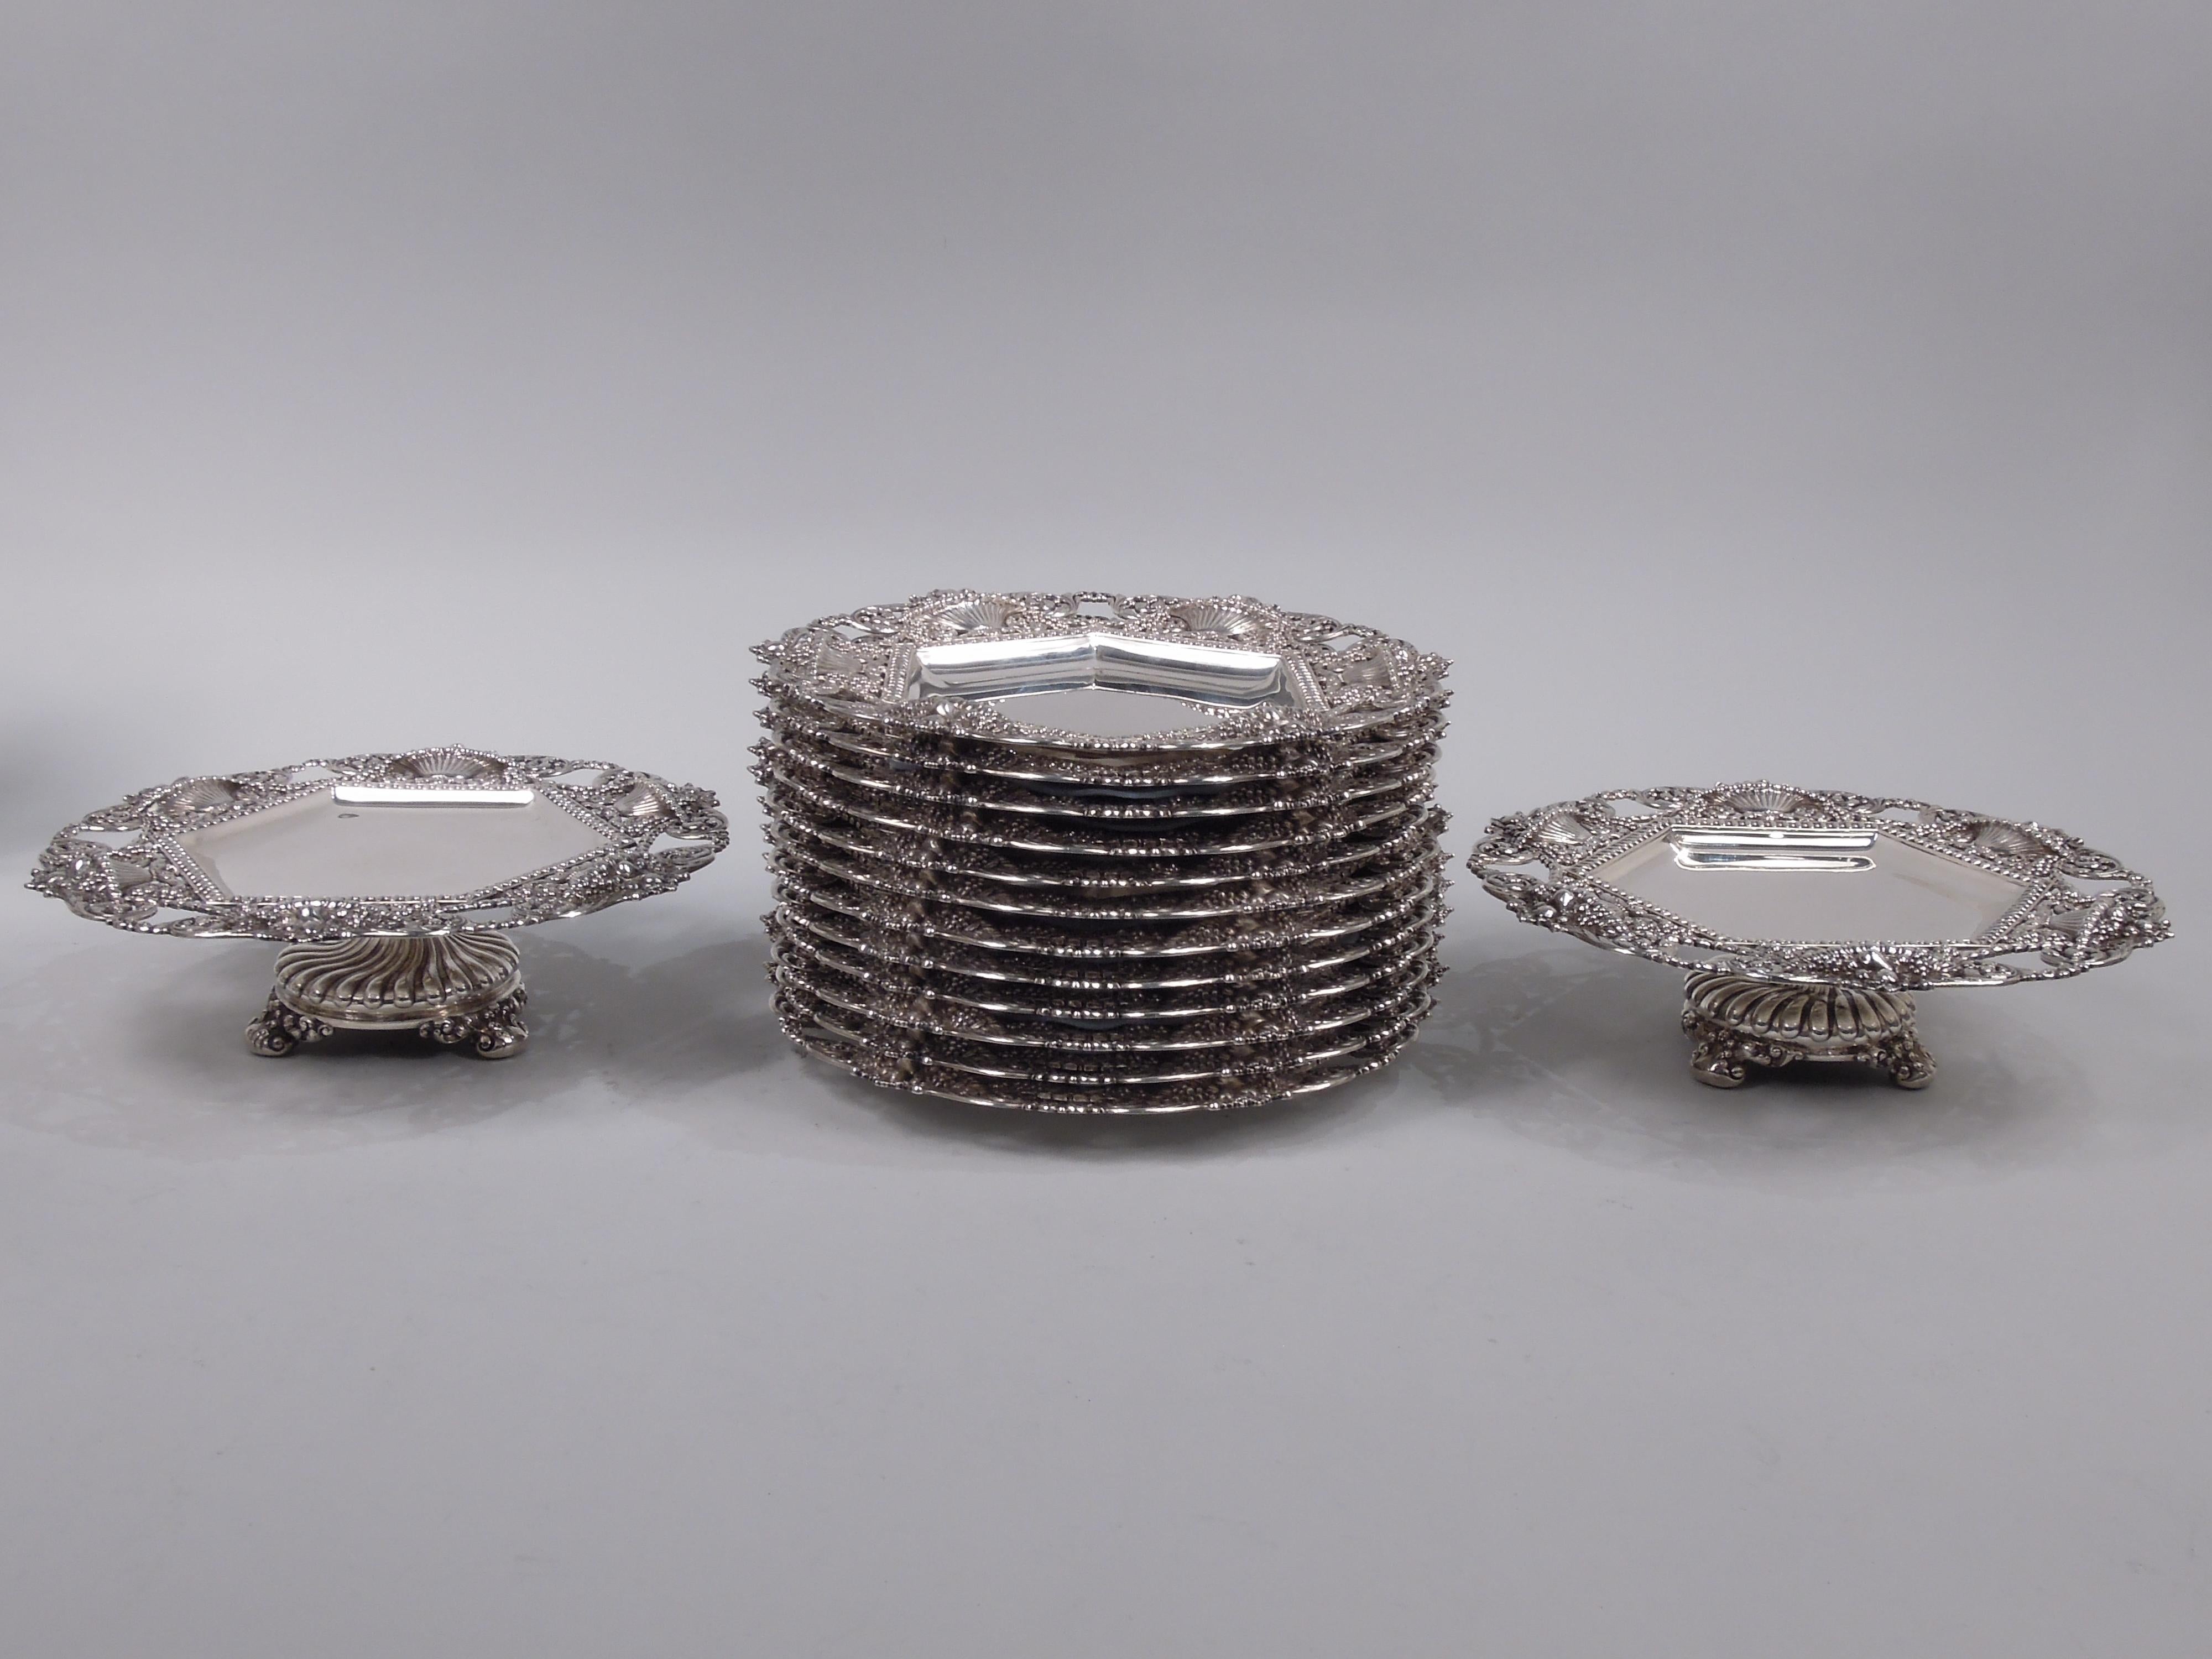 Turn-of-the-century sterling silver dessert set with world’s fair exhibition history. Made by Tiffany & Co. in New York. This set comprises 12 plates and 2 compotes. Each plate: Hexagonal well bordered by bead-and-reel surrounded by applied and open